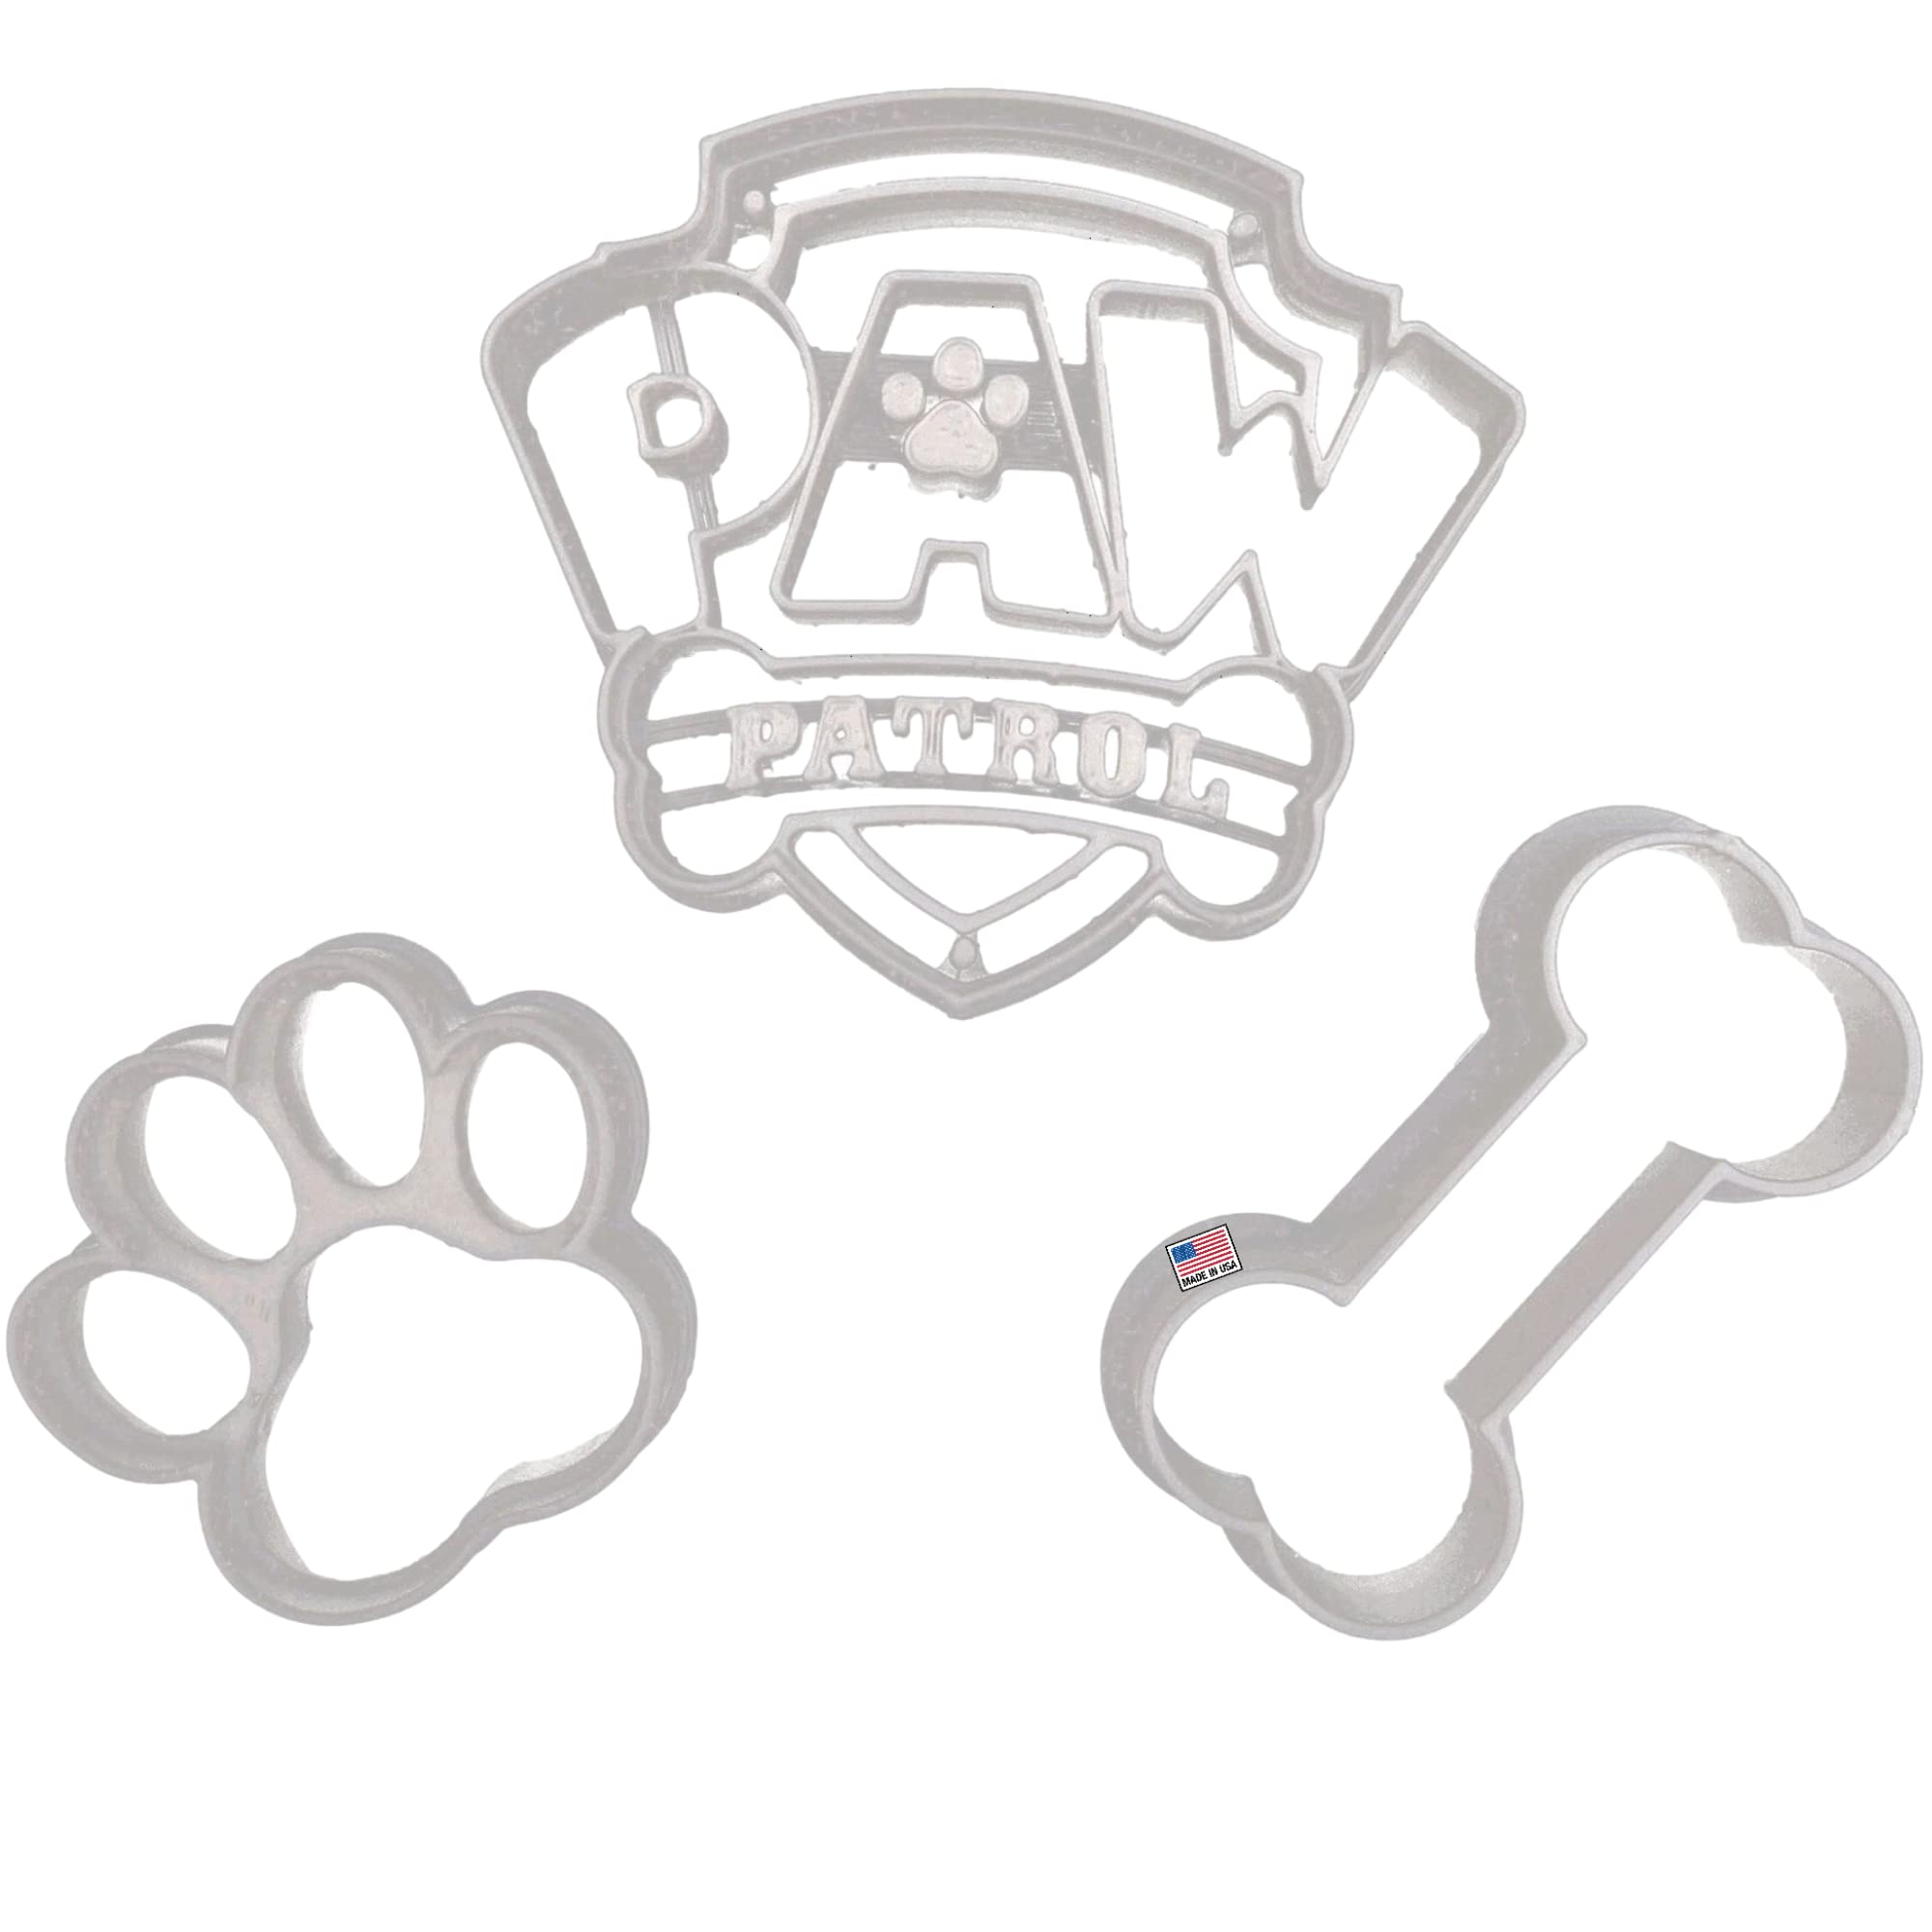 Inspired by paw patrol cookie cutters paw patrol childrens cartoon characters badgeshield dog bone and puppy paw print d printed cookie cutters pack home kitchen